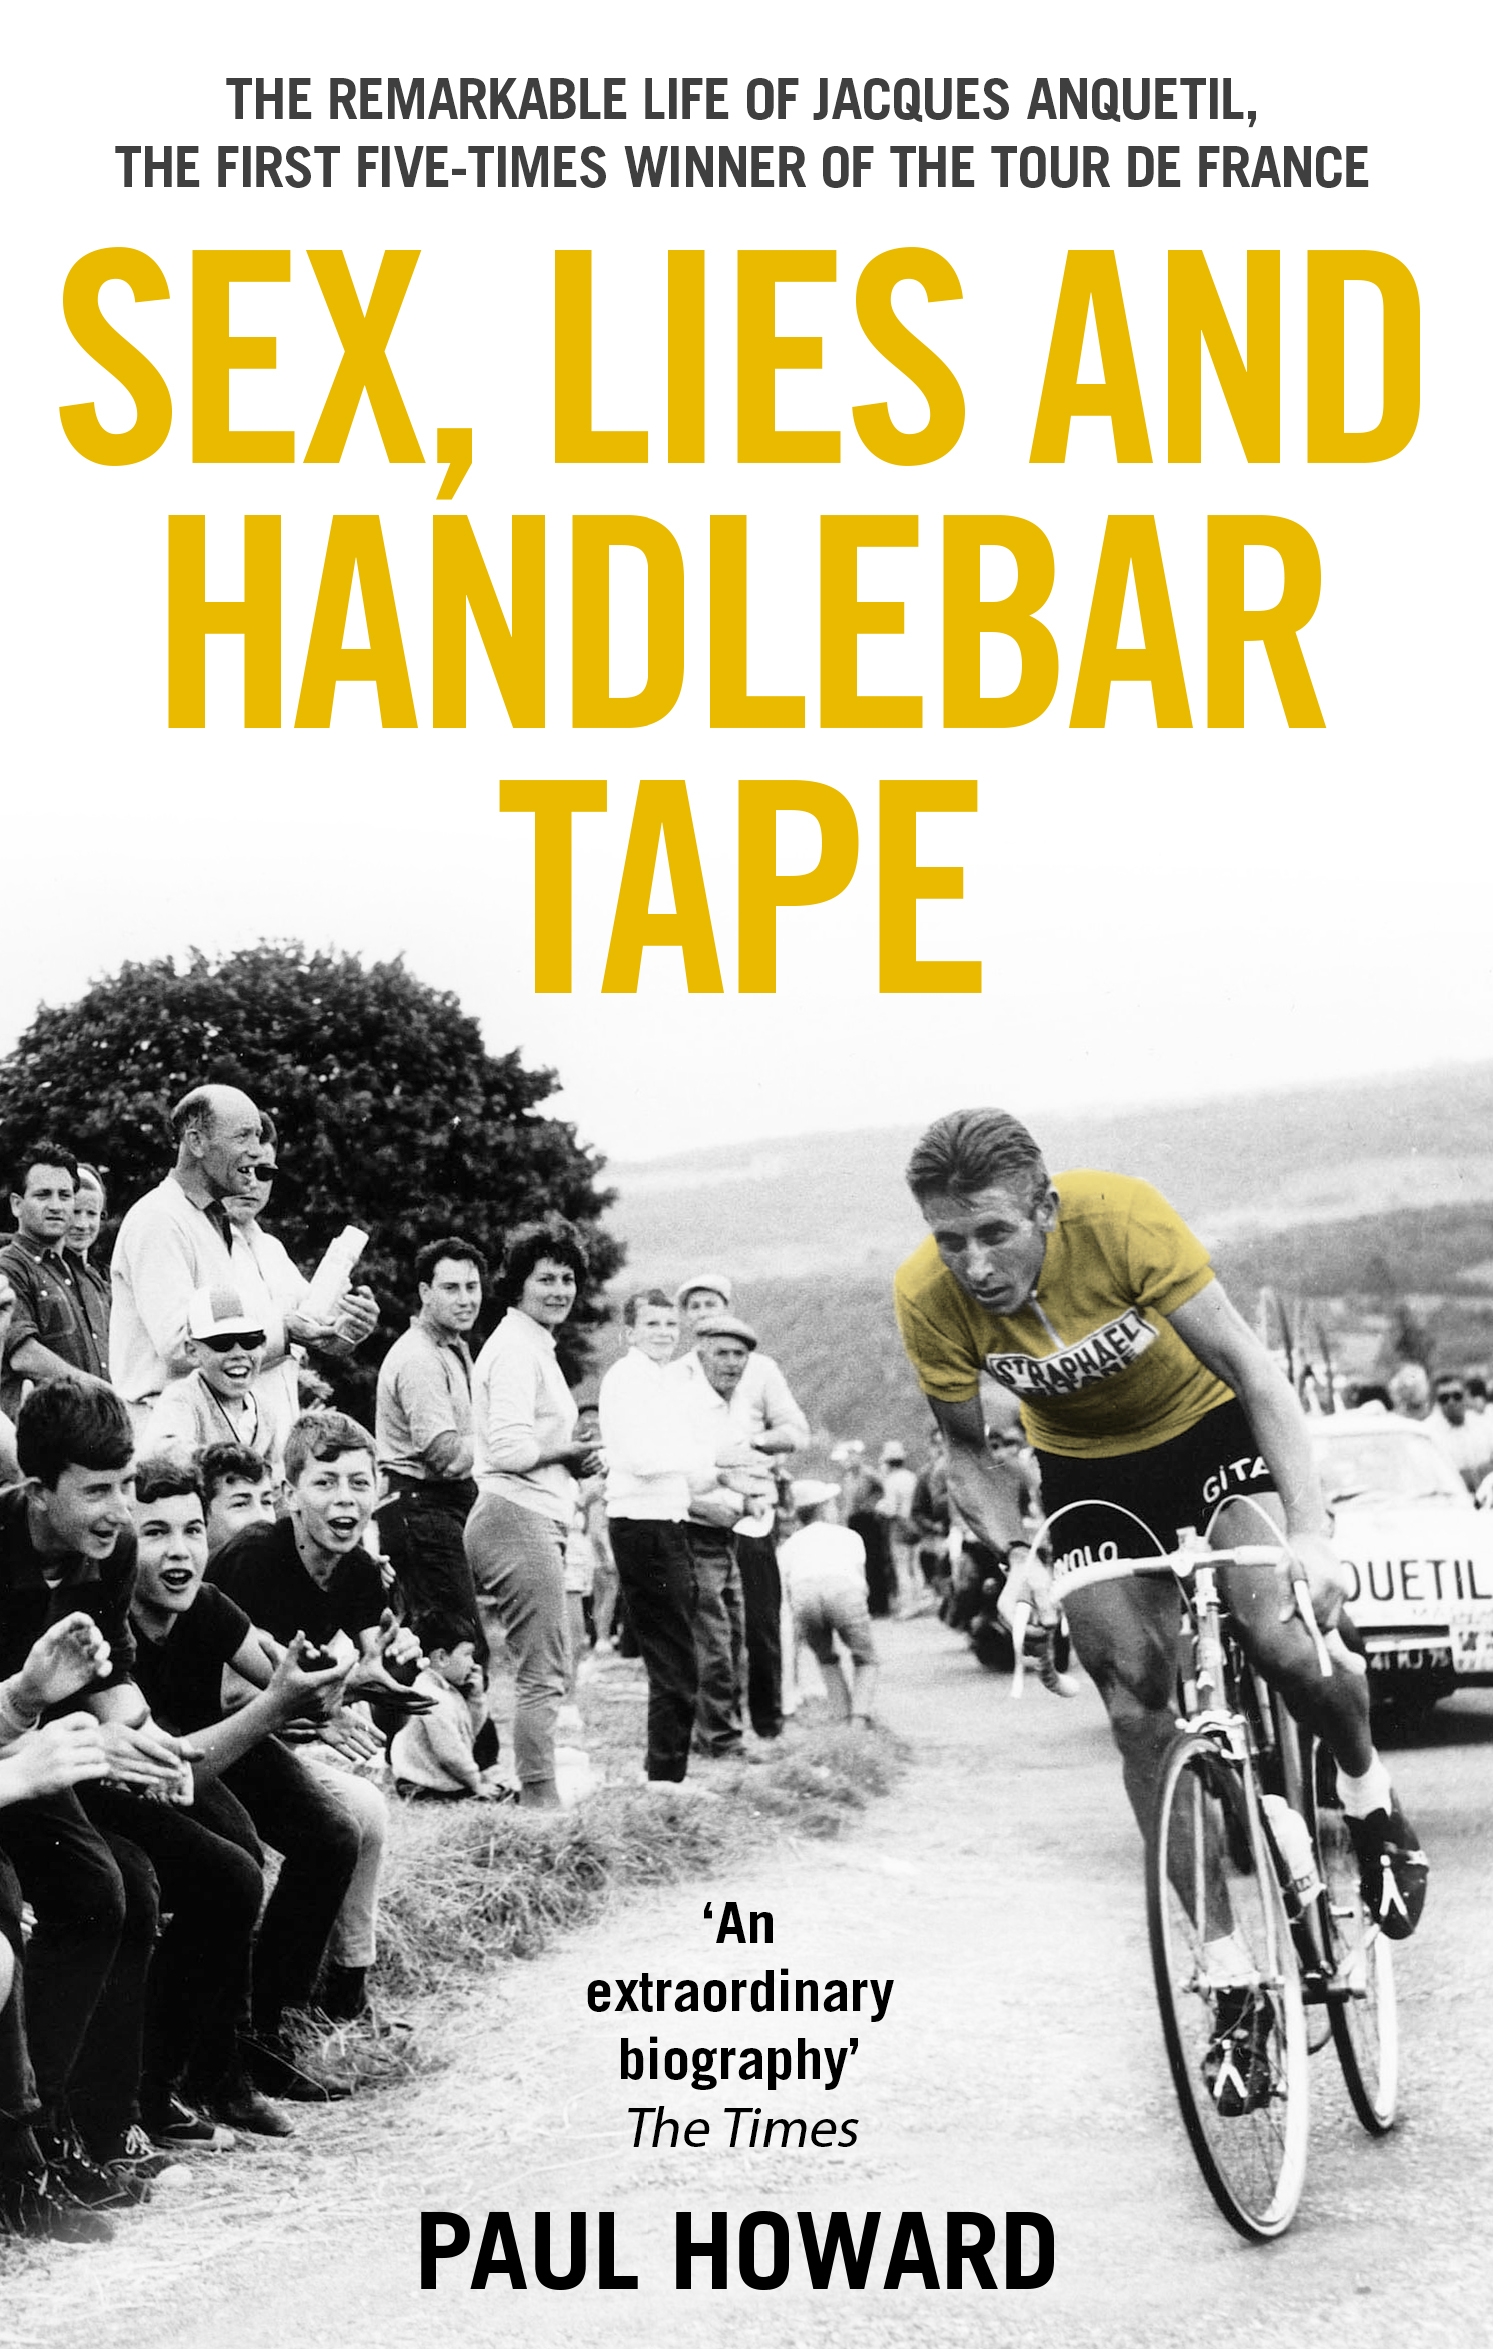 Sex Lies And Handlebar Tape By Paul Howard Penguin Books New Zealand 8488